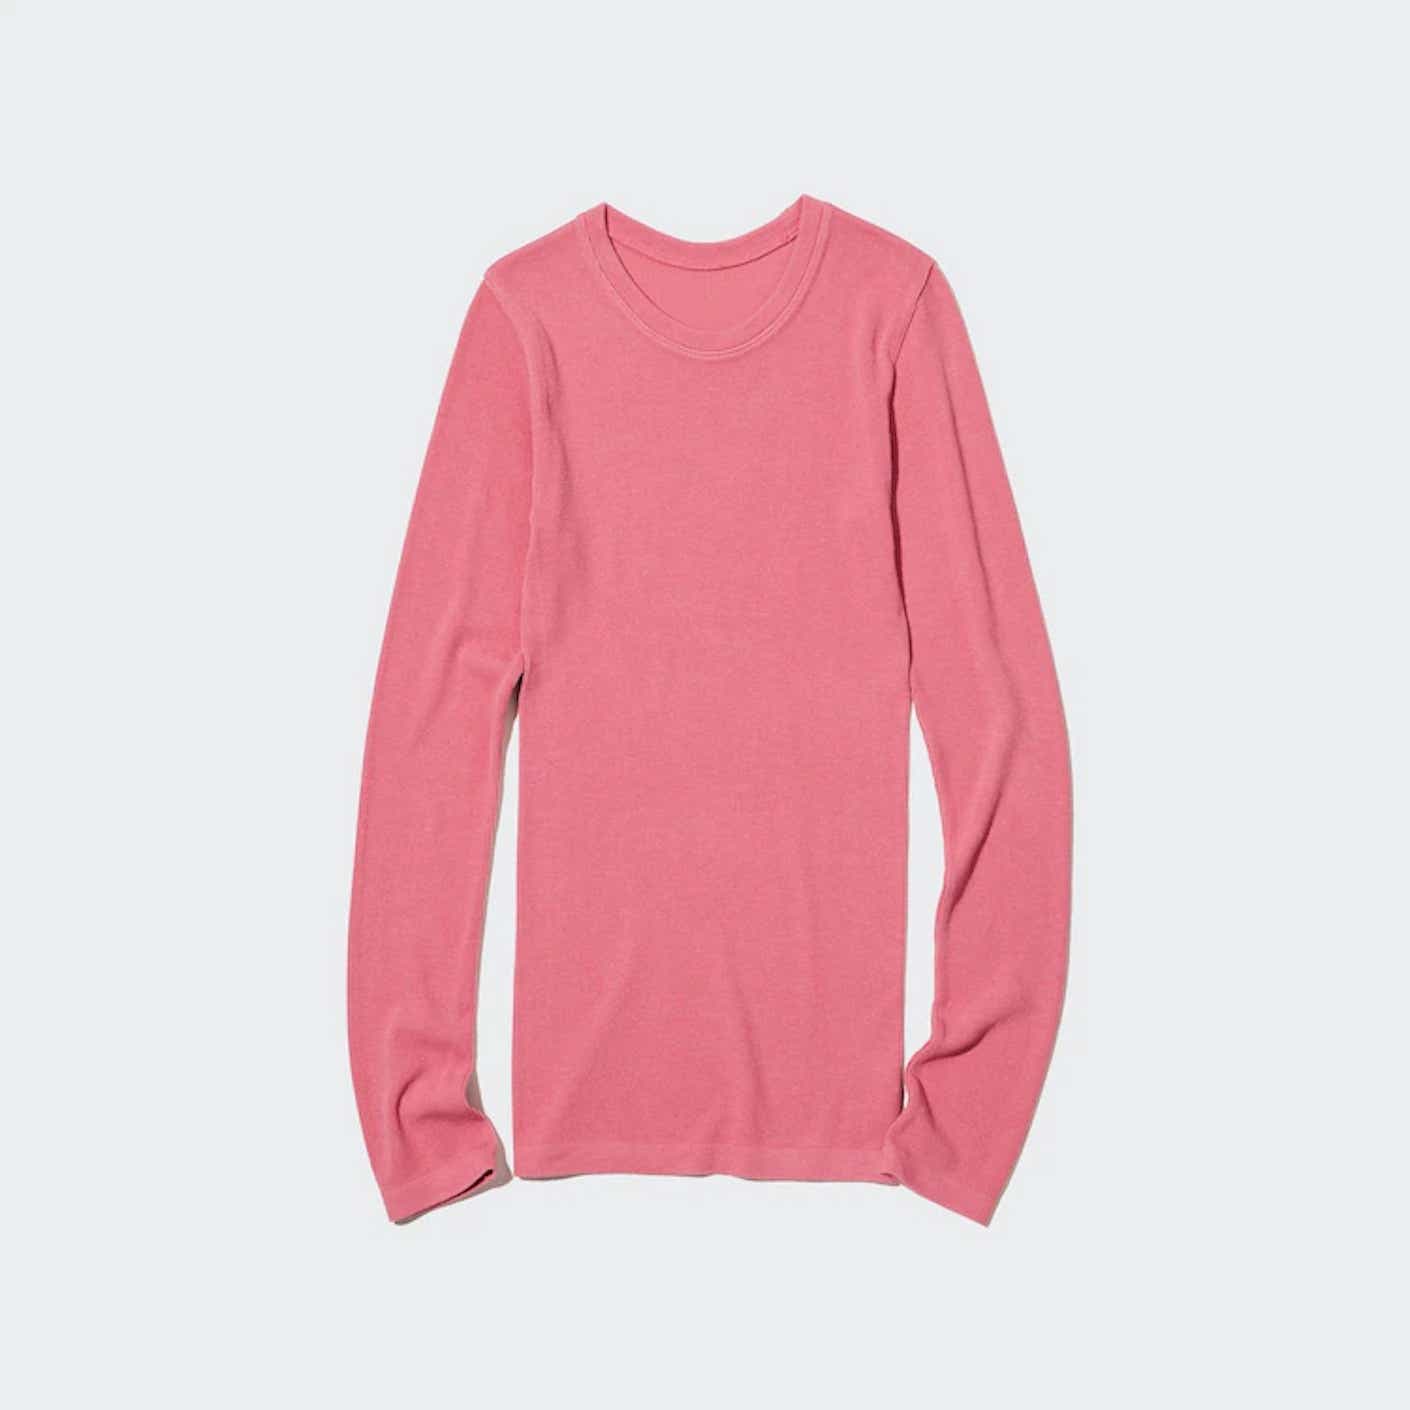 A long, long-sleeved, pink shirt is displayed on a flat, white surface.